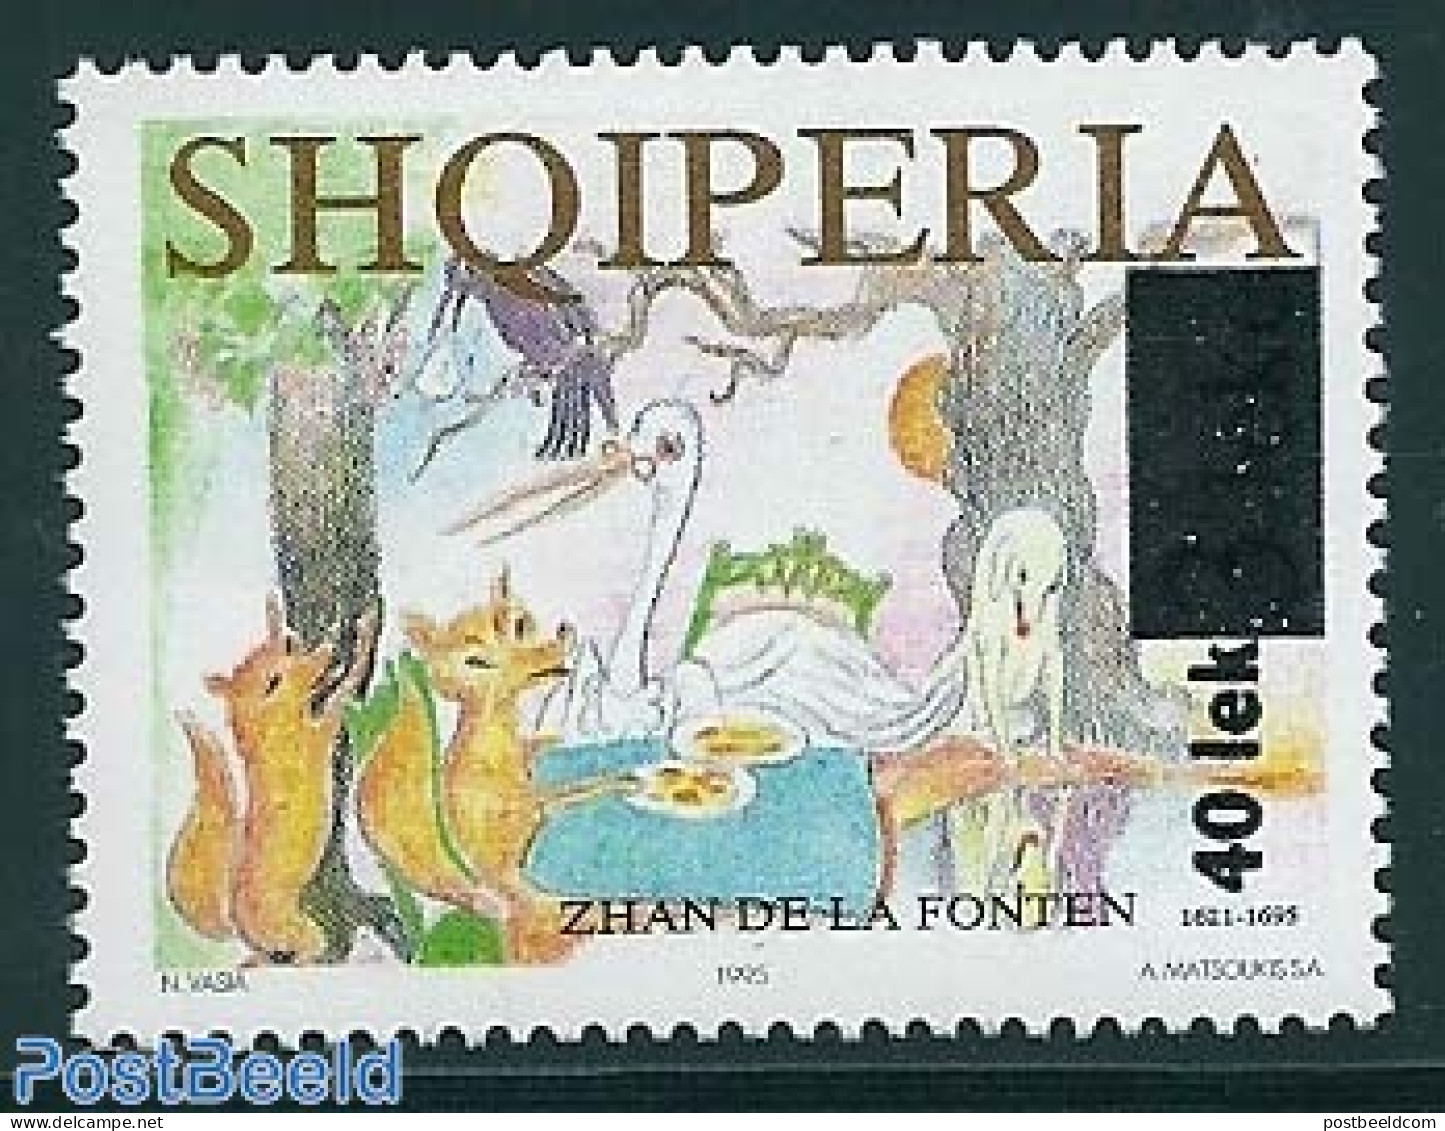 Albania 2006 40L On 3L, Stamp Out Of Set, Mint NH, Art - Fairytales - Fairy Tales, Popular Stories & Legends